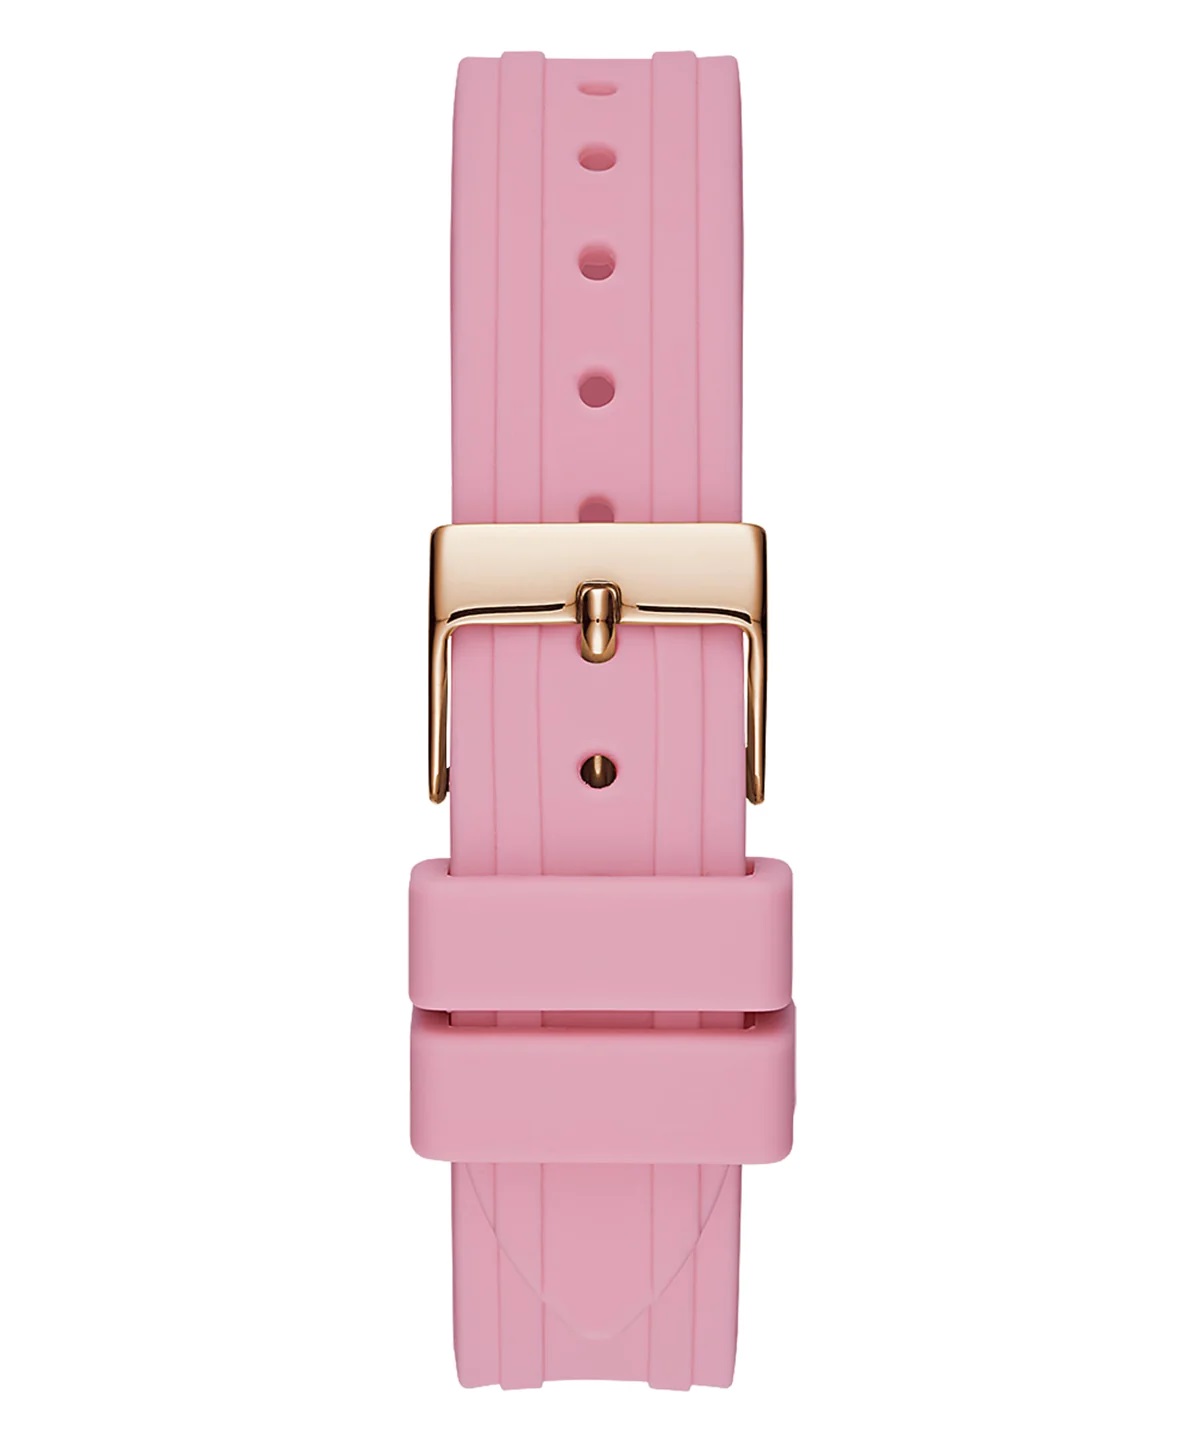 ĐỒNG HỒ NỮ GUESS LADIES PINK ROSE GOLD TONE ANALOG SILICONE STRAP WATCH GW0034L3 7